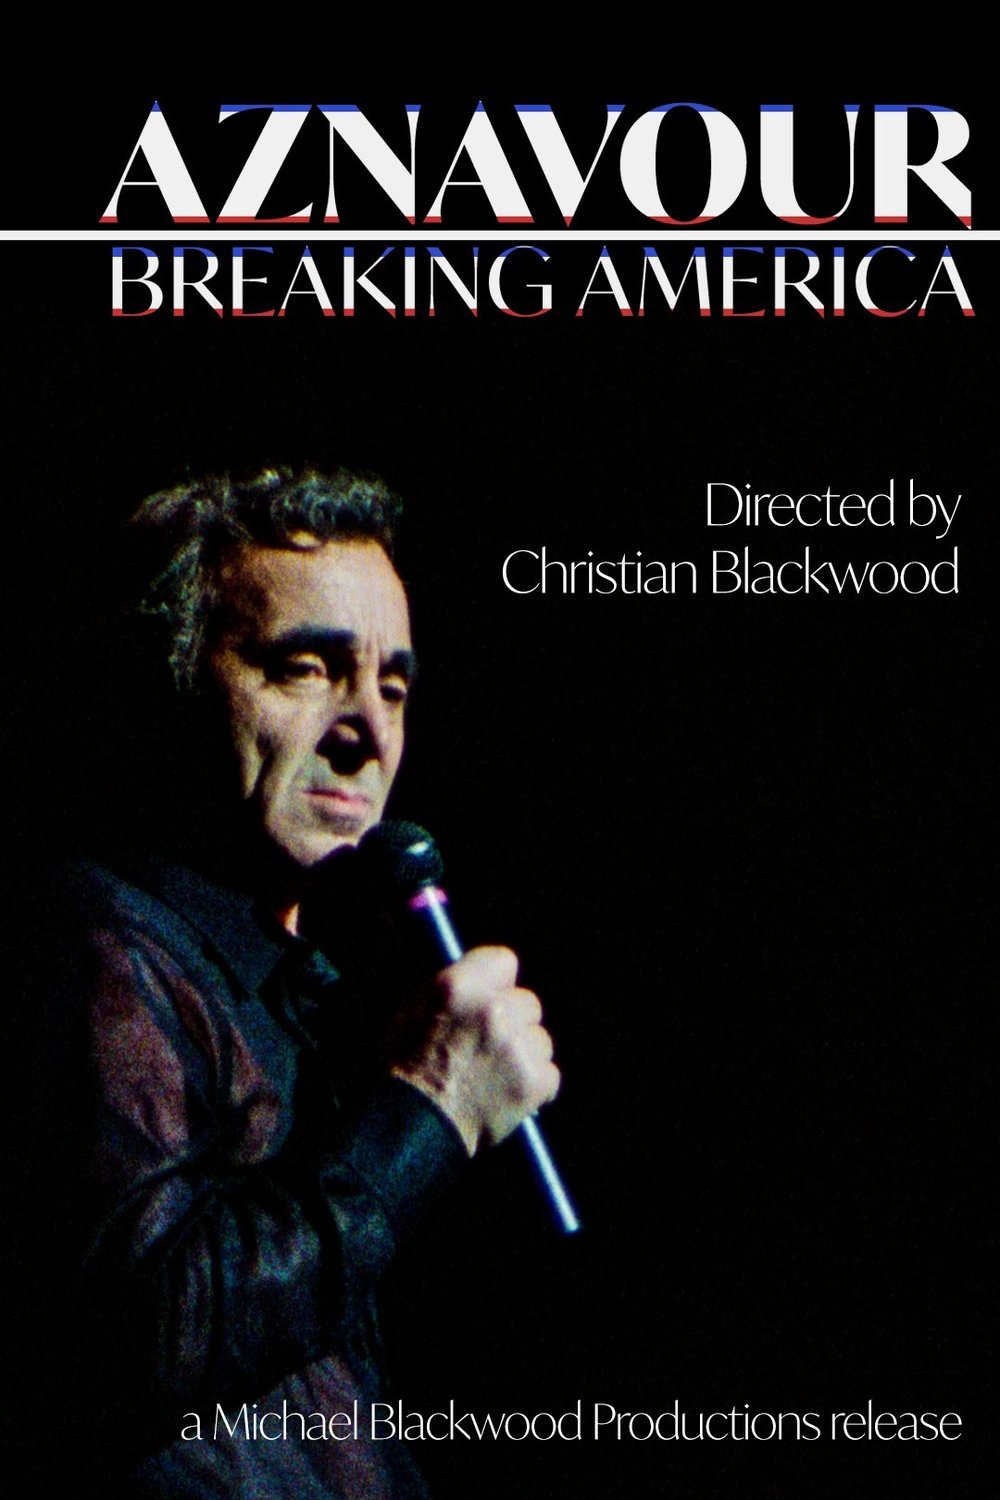 Poster of the movie Aznavour: Breaking America